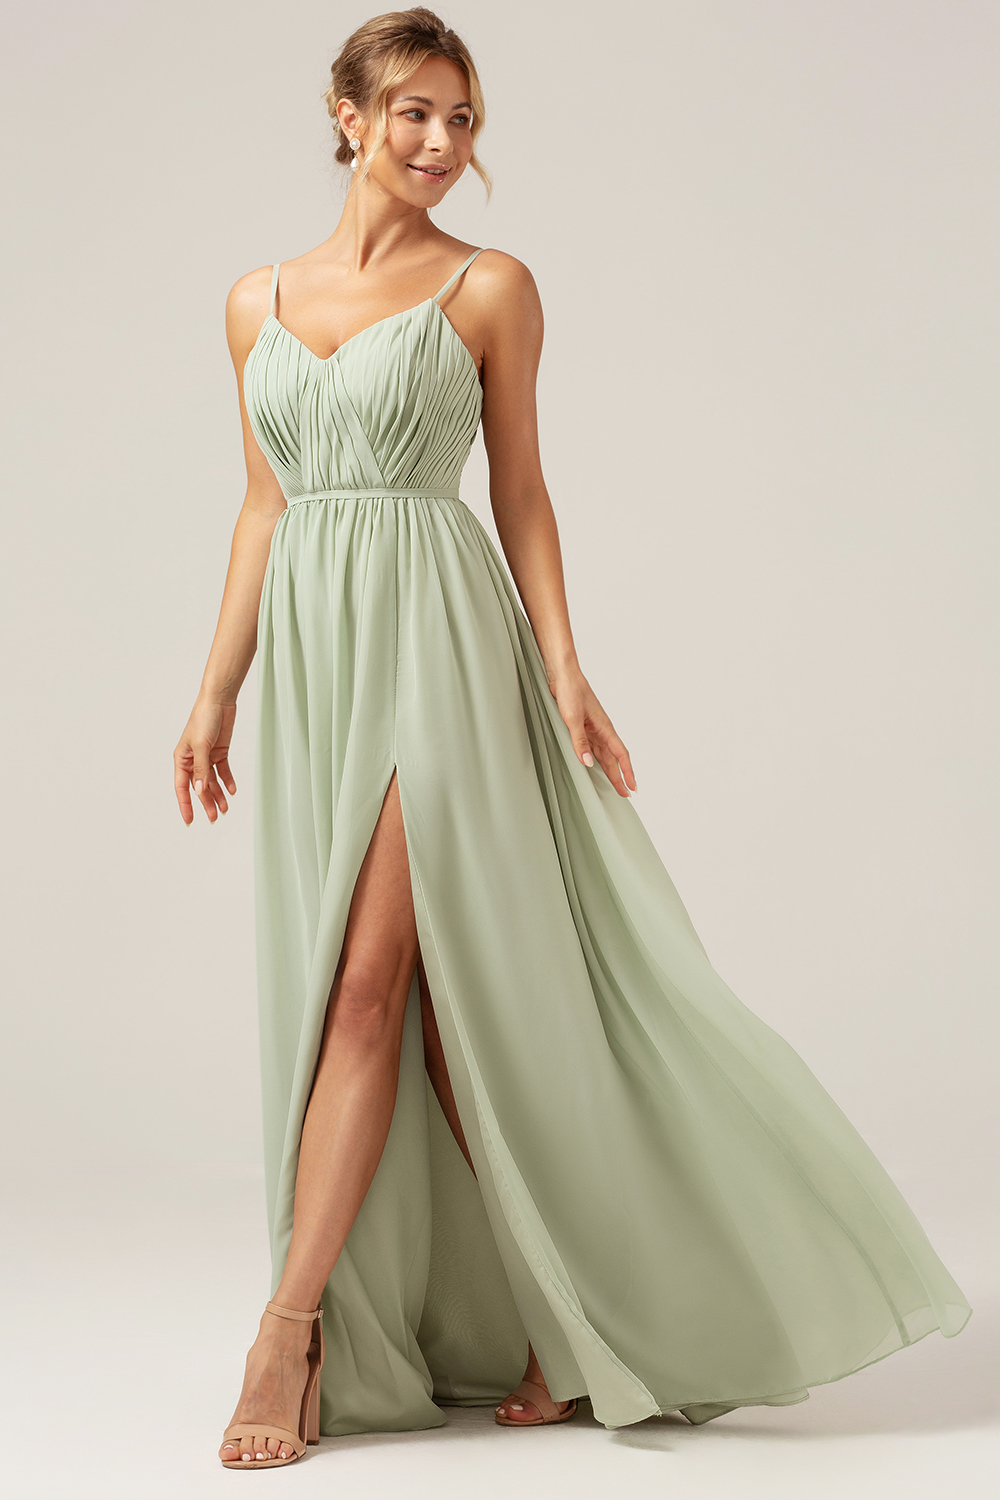 Dusty Sage A Line Spaghetti Straps Pleated Maternity Bridesmaid Dress with Slit